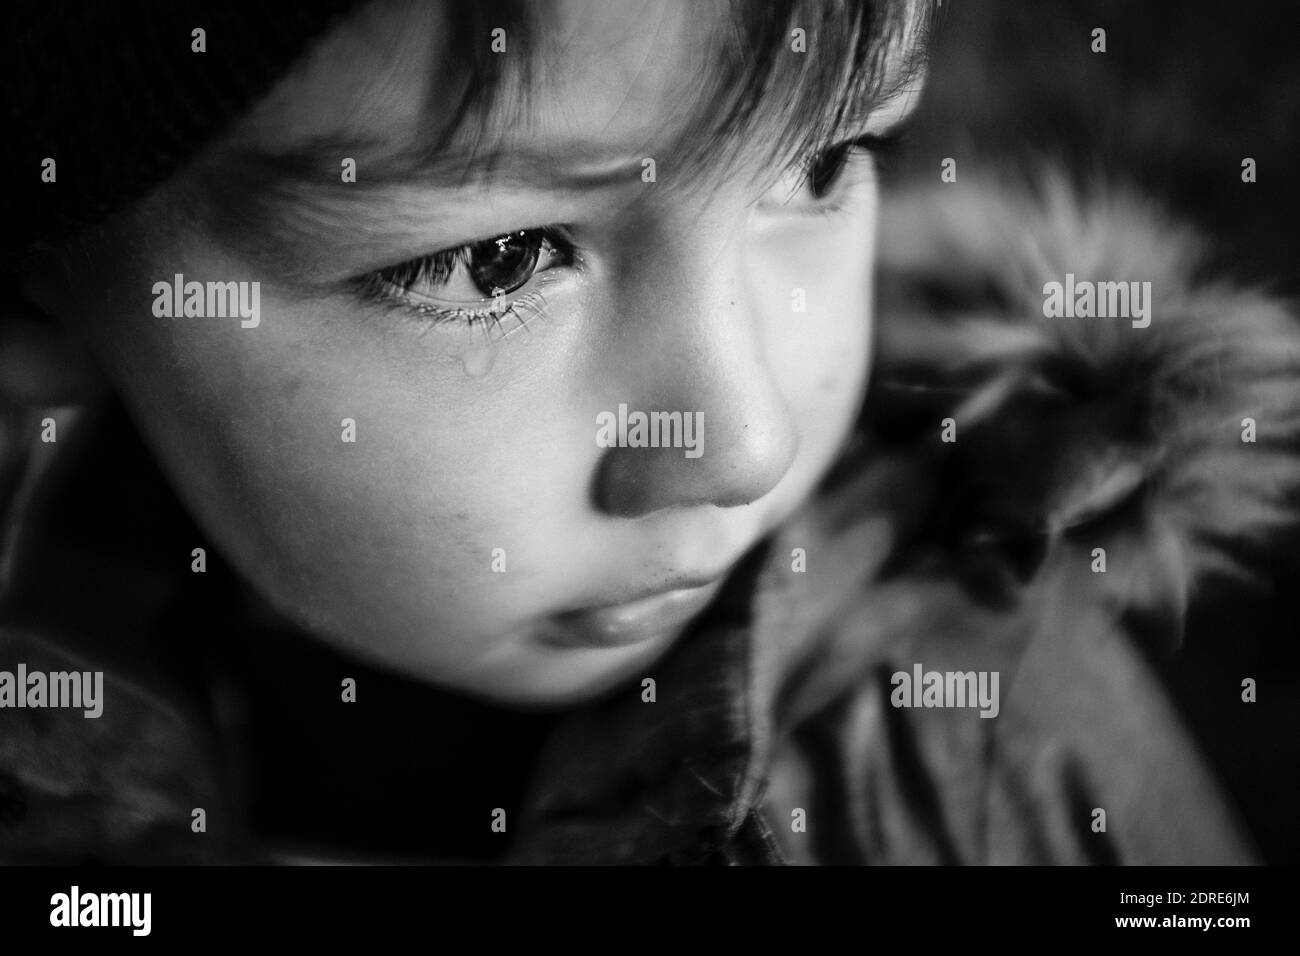 Close up boys crying face Black and White Stock Photos & Images - Alamy